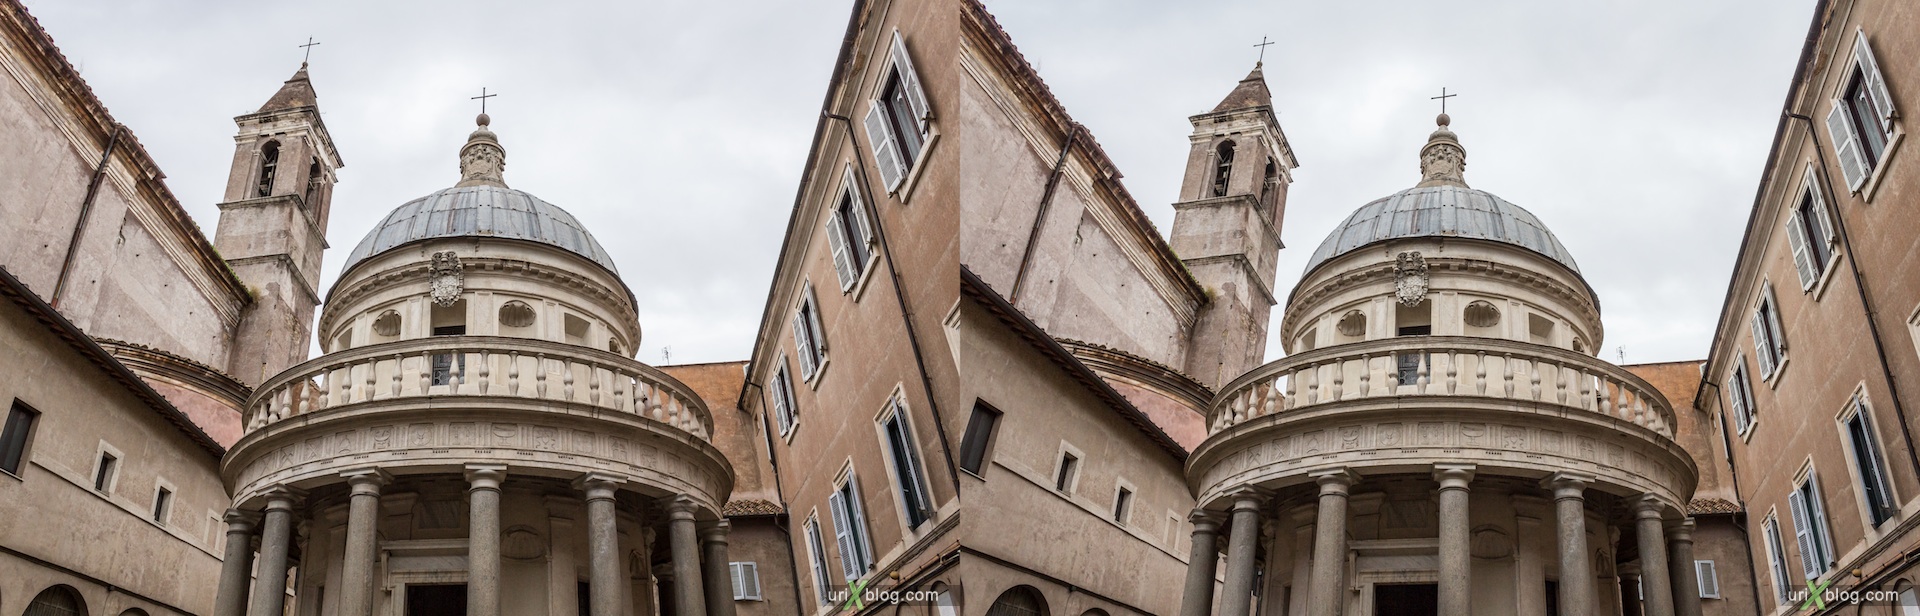 2012, Tempietto of San Pietro in Montorio, Rome, Italy, cathedral, monastery, Christianity, Catholicism, 3D, stereo pair, cross-eyed, crossview, cross view stereo pair